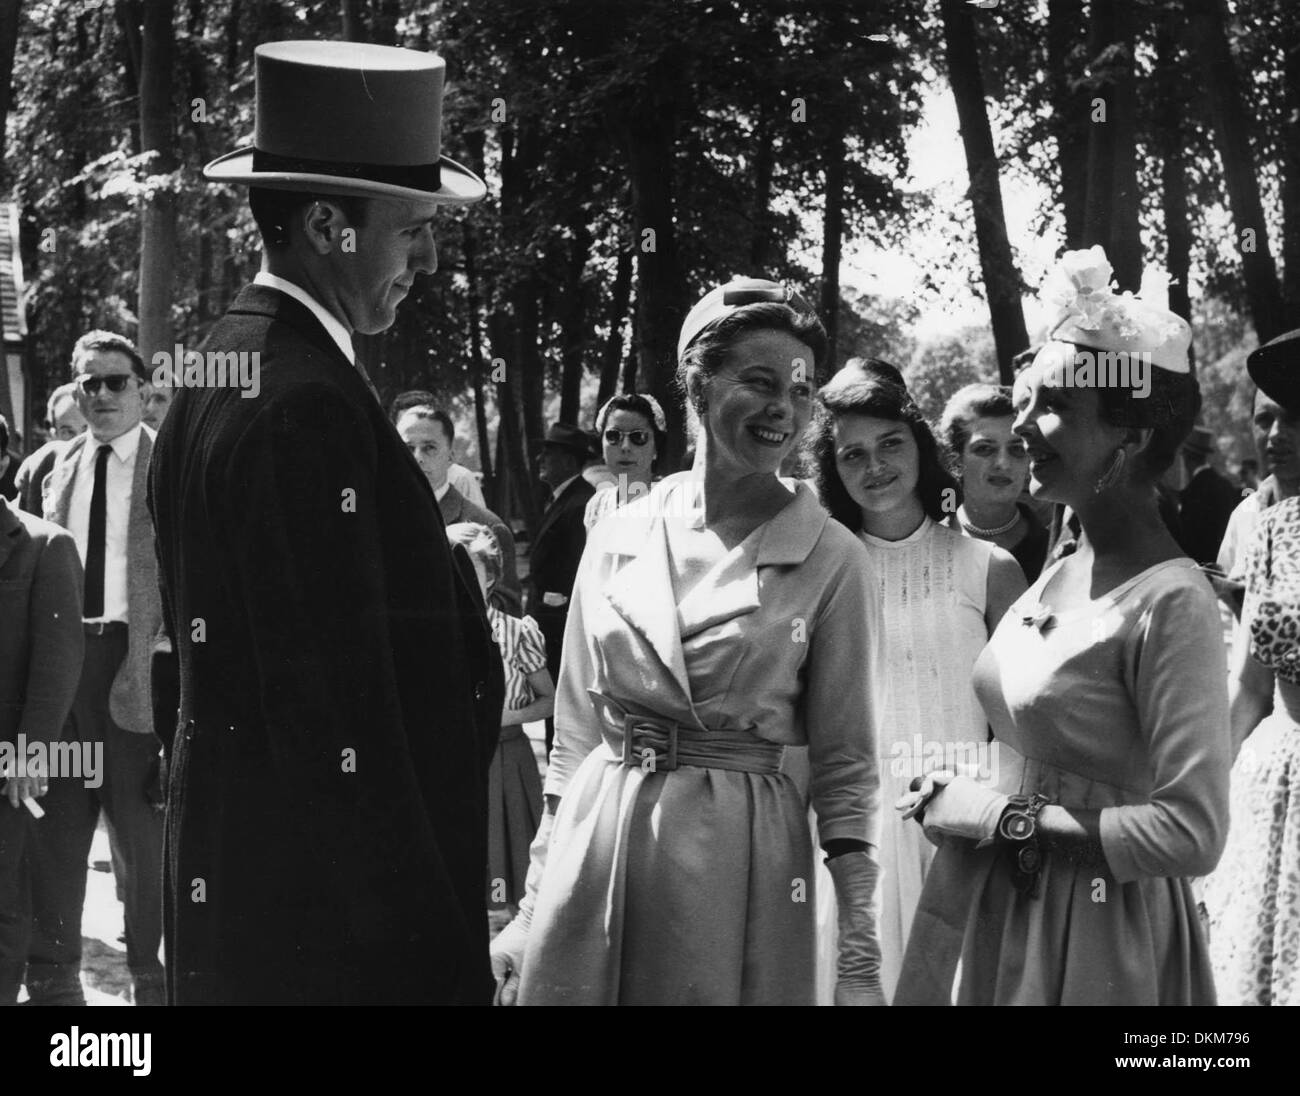 June 1, 1960 - Paris, France - Two time Academy Award winning film legend, actress ELIZABETH 'LIZ' TAYLOR, known for her beautiful eyes, and glamorous Hollywood lifestyle. PICTURED: Liz Taylor chats with friends at the Jockey Club in Chantilly. (Credit Image: © KEYSTONE Pictures USA) Stock Photo